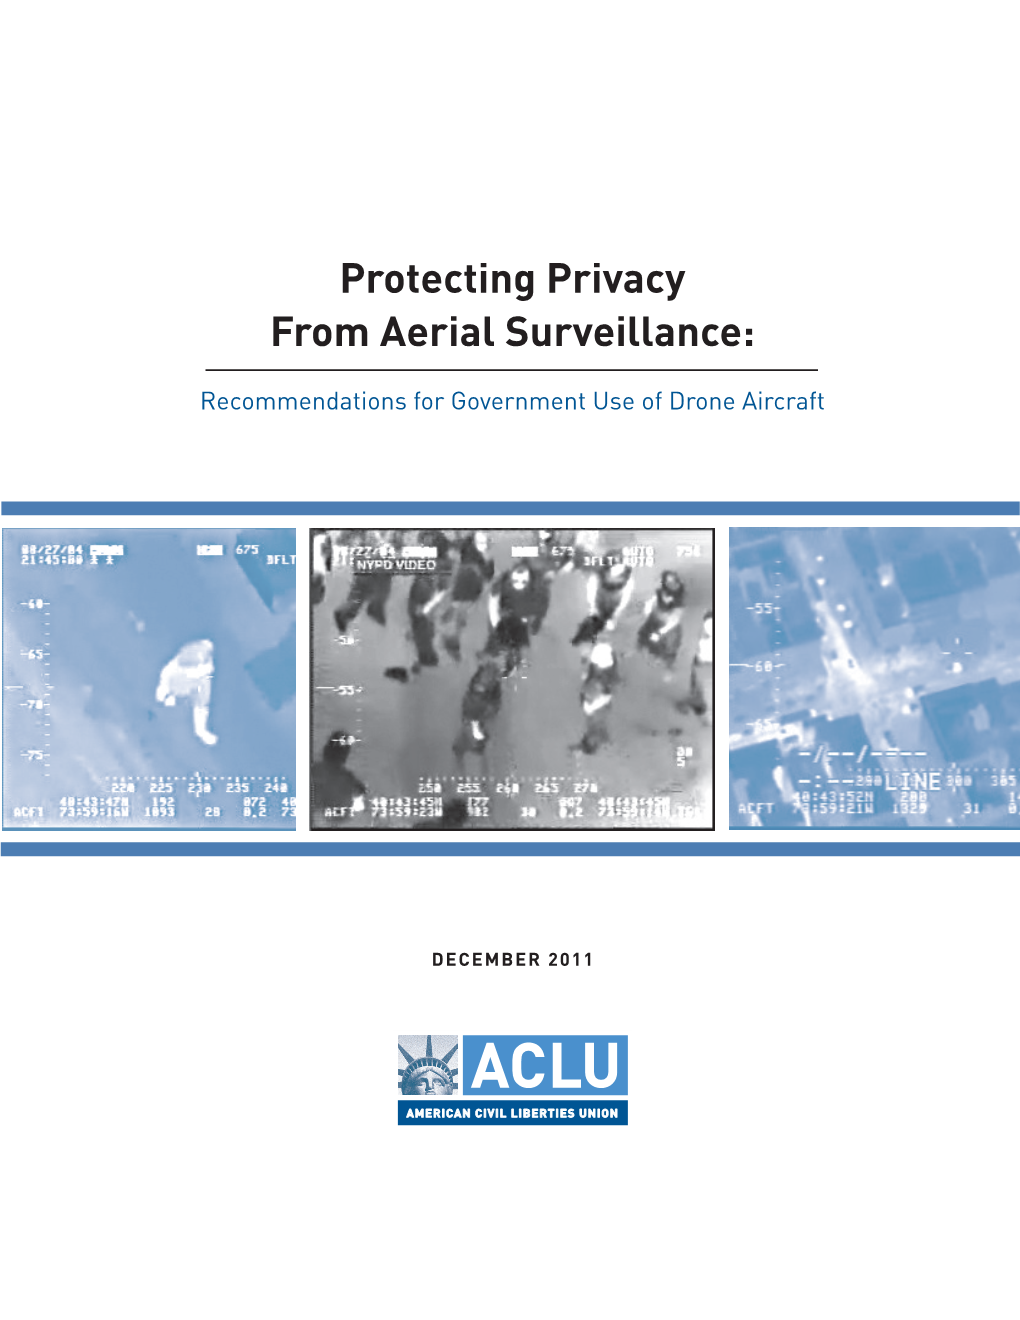 Protecting Privacy from Aerial Surveillance